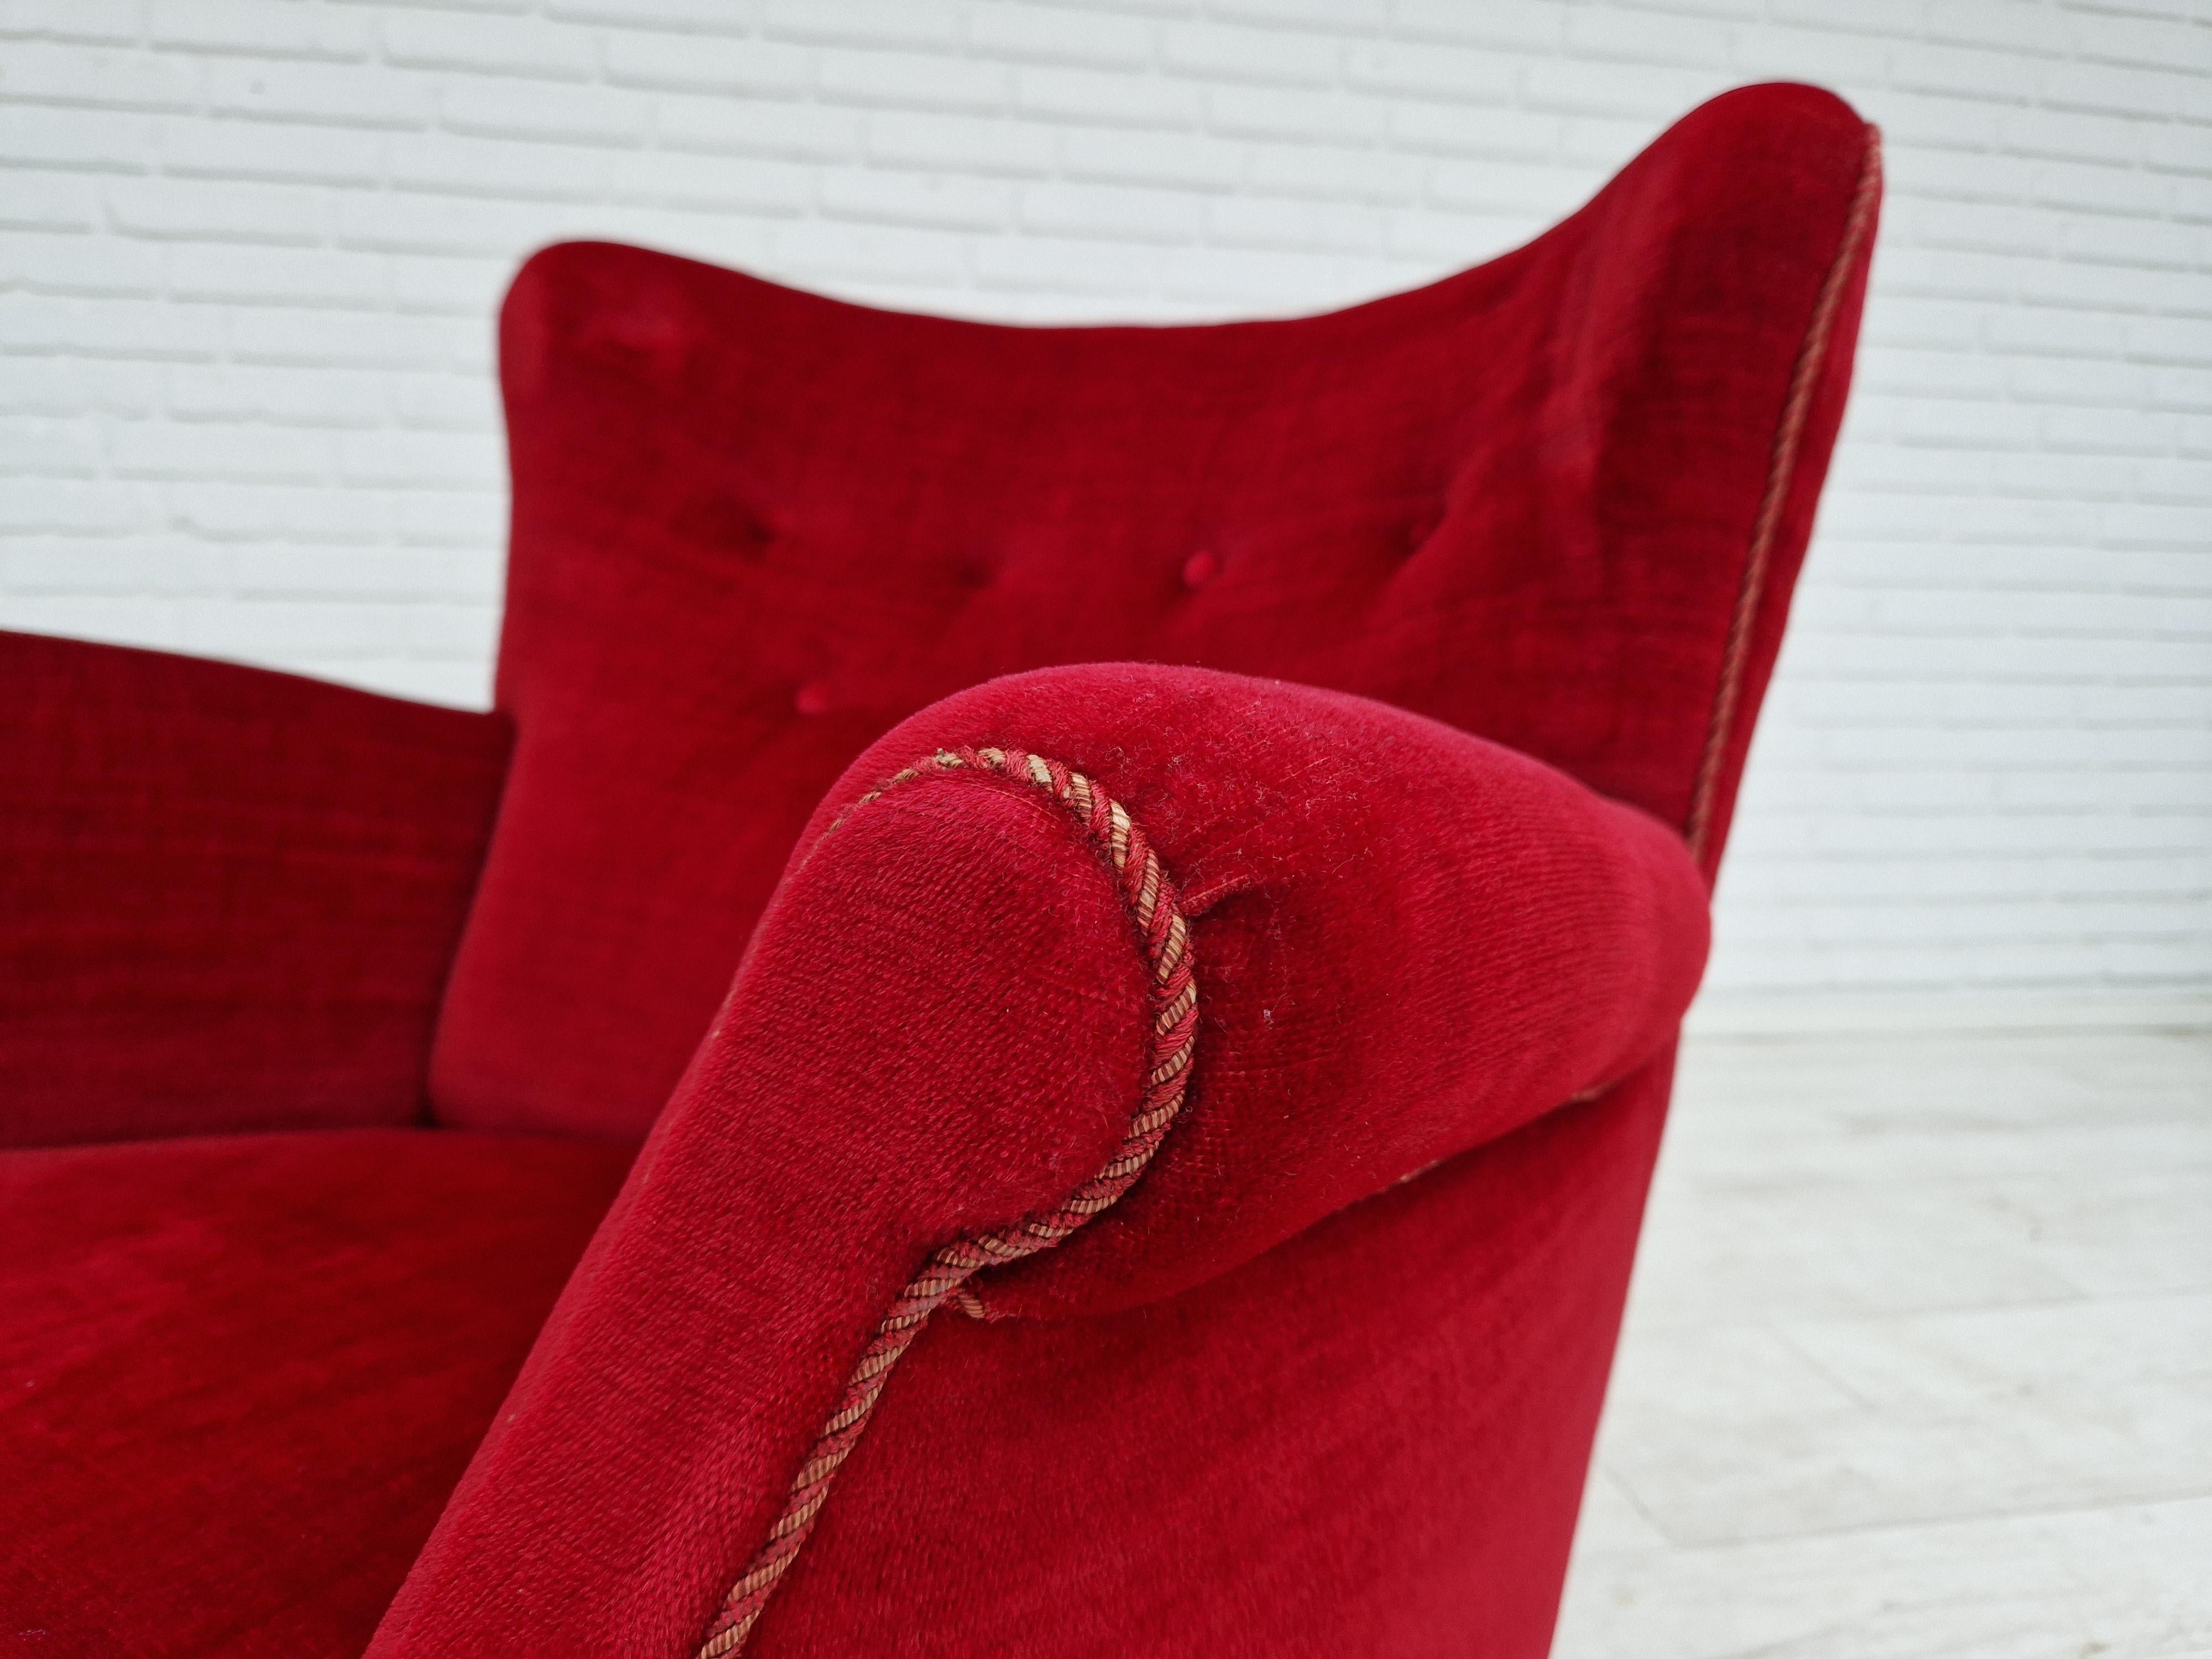 Vintage lounge chair of Danish design. Made around 1960 by a Danish furniture manufacturer. Original cherry-red velvet upholstery in very good condition, no stains, no smells. Legs in beech. Brass springs in the seat.